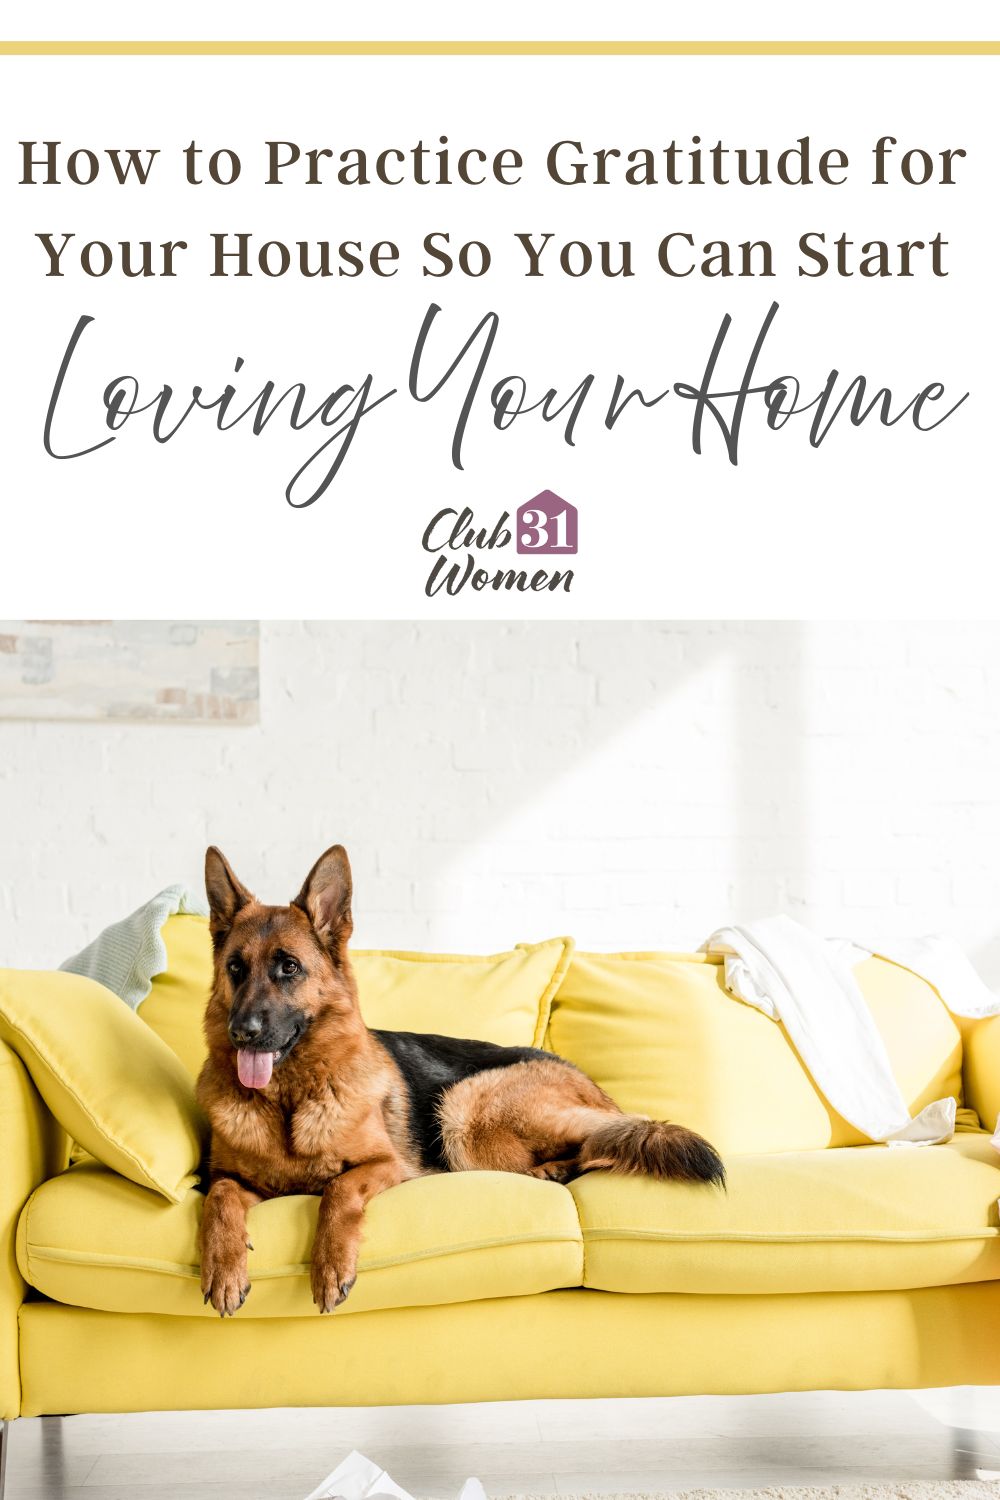 Learn more about creating a beautiful and clutter-free home on a budget and loving your home an investing in it. via @Club31Women